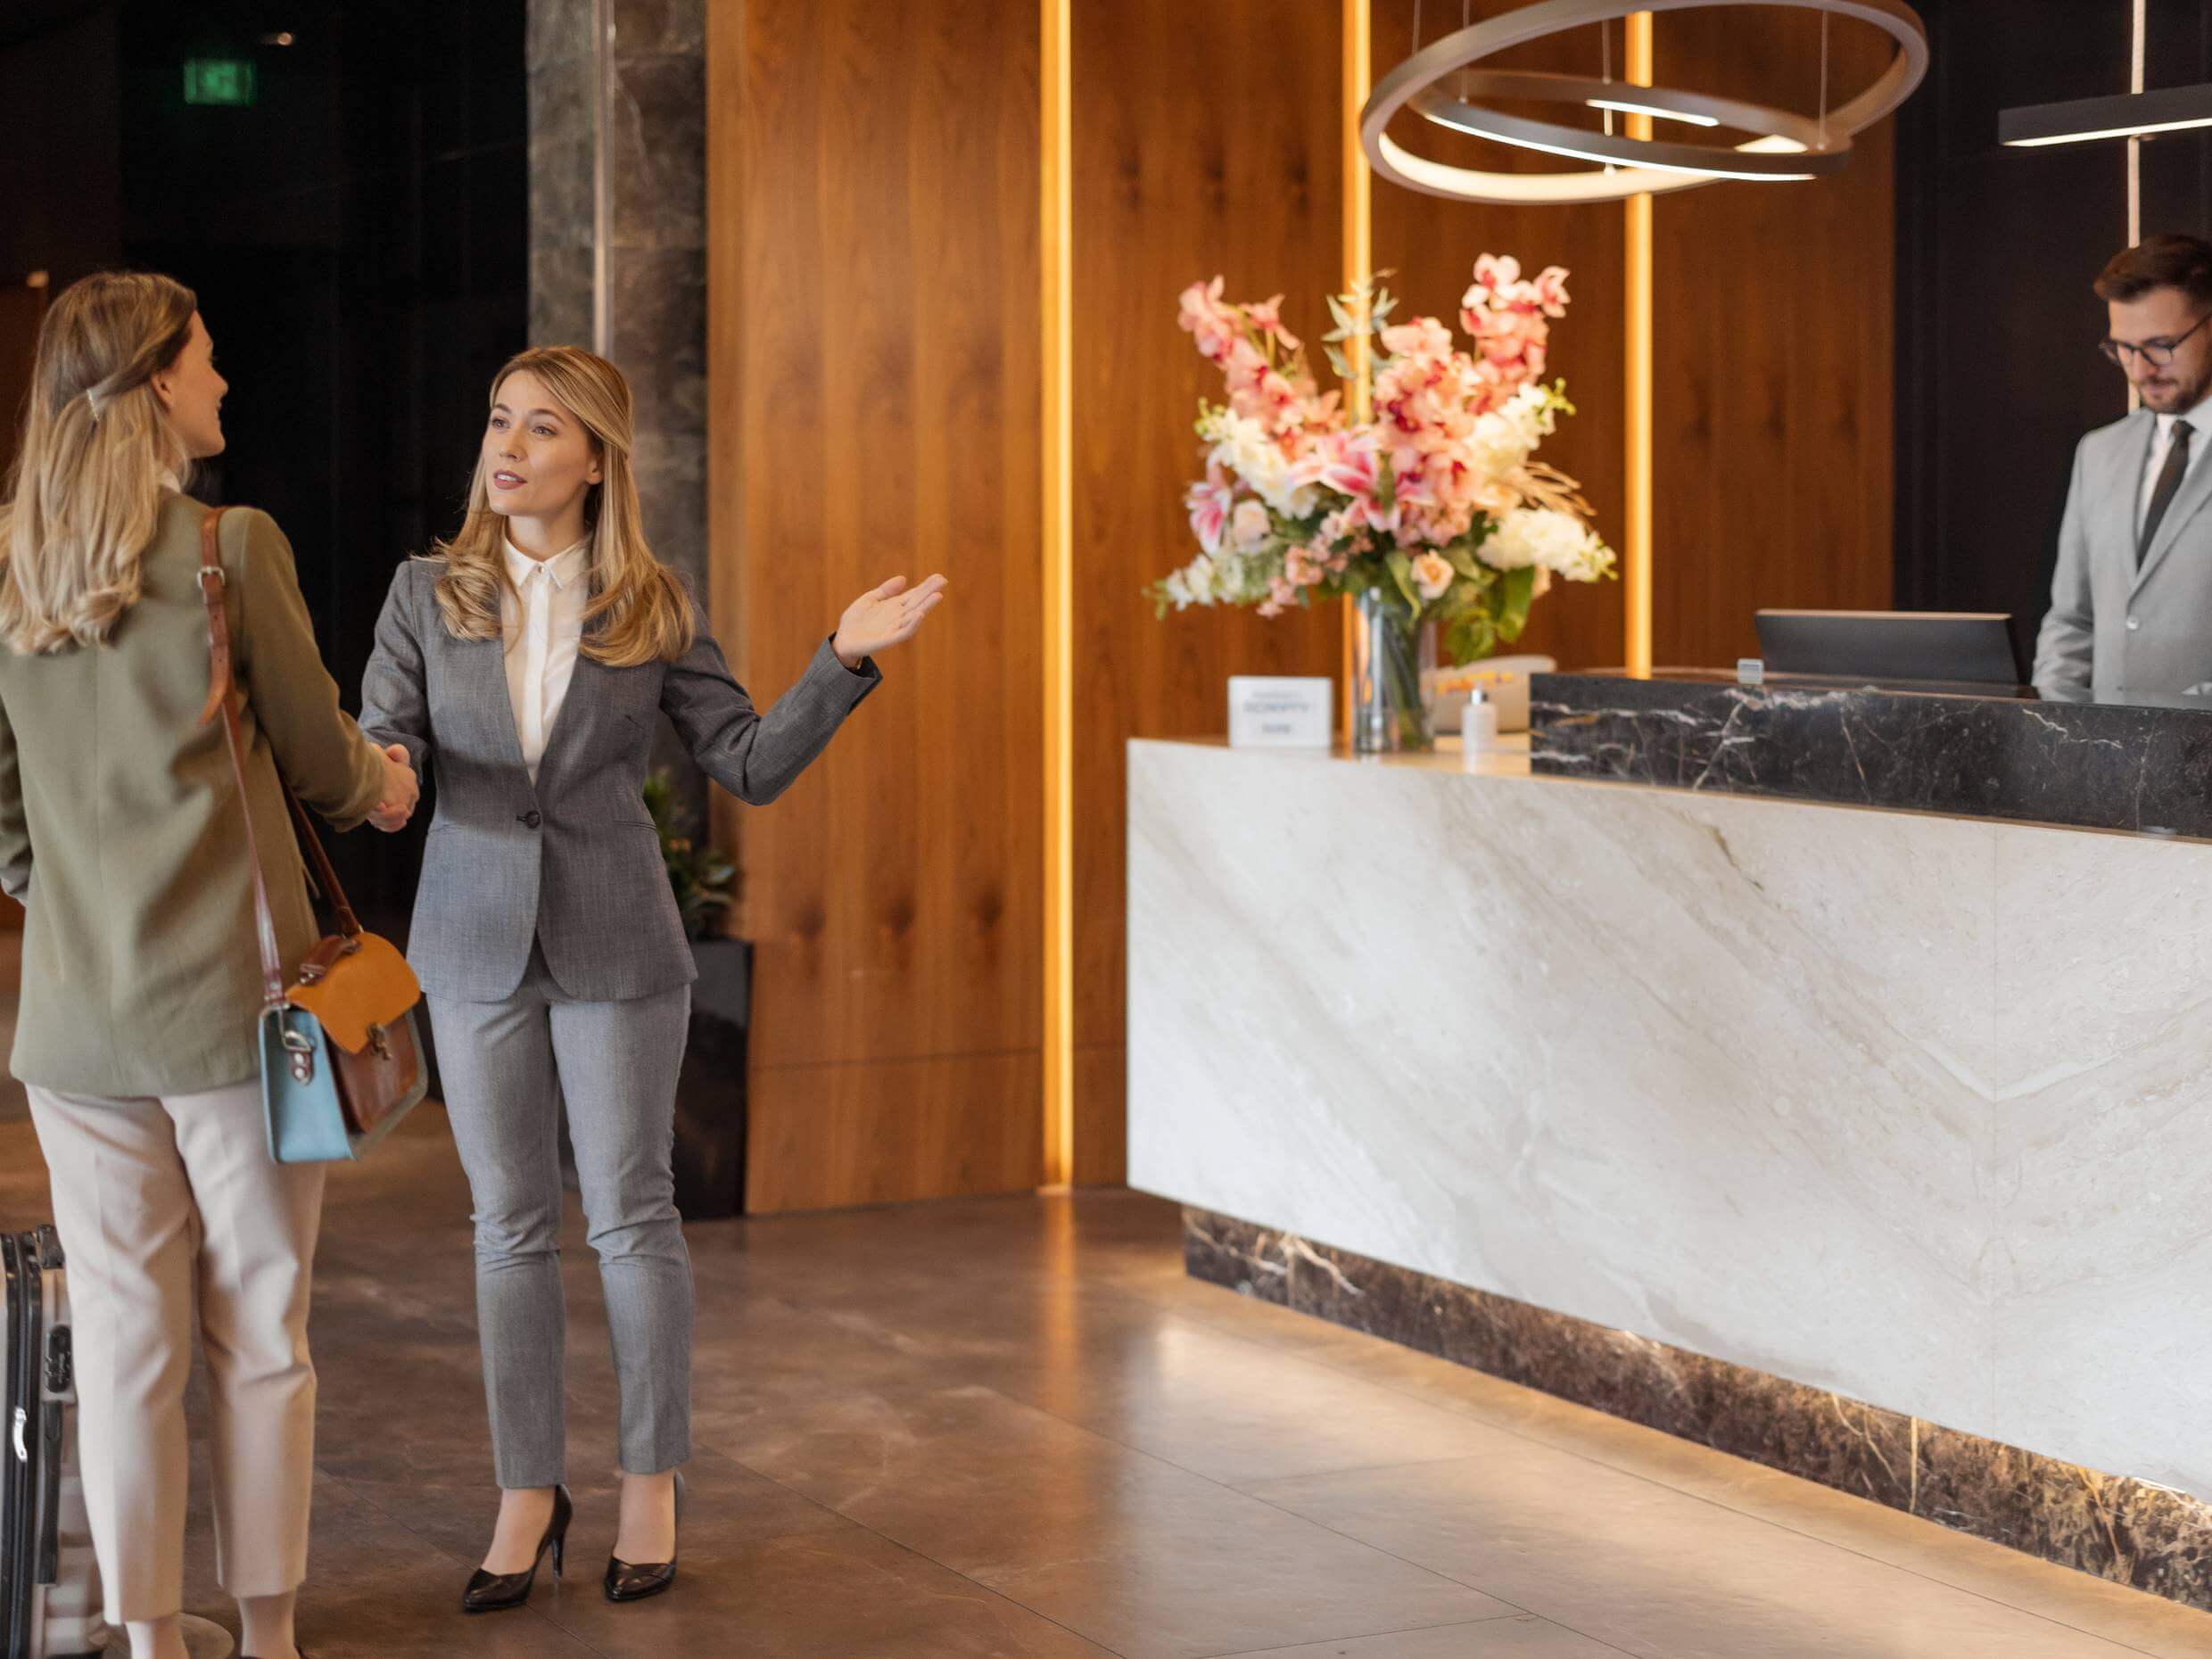 hotel reception area with hospitality business manager aiding guest skillfully on the left